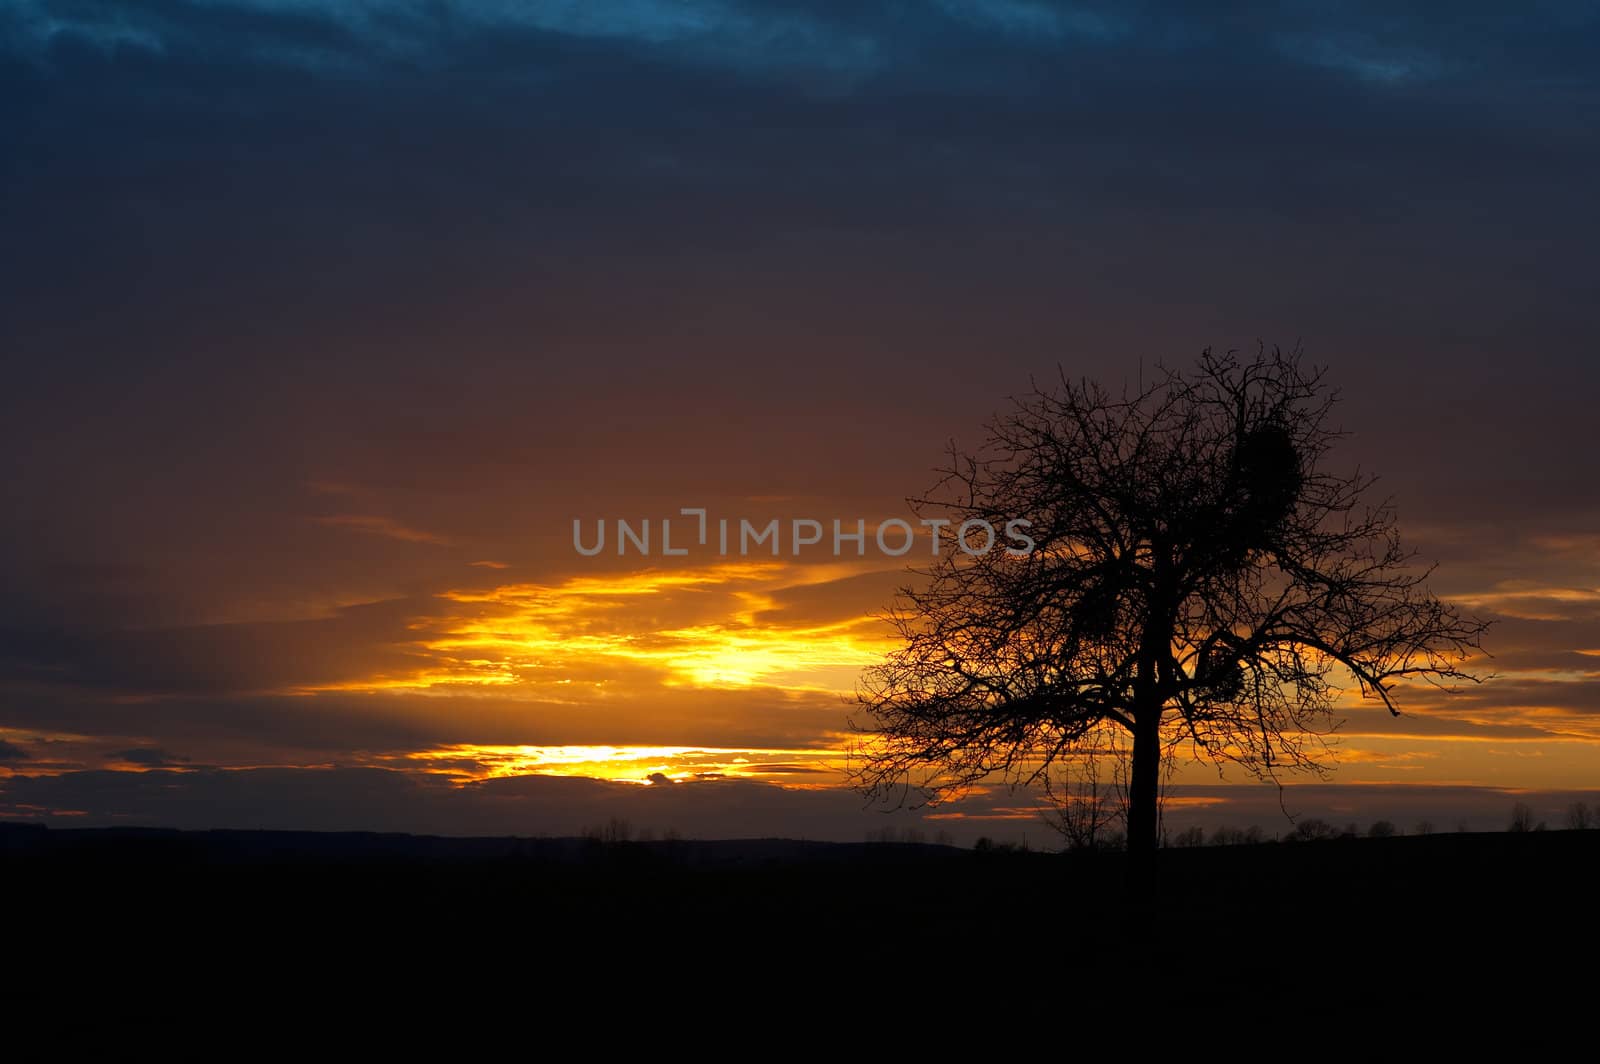 Sunset and lonely tree, orange sky by ecobo